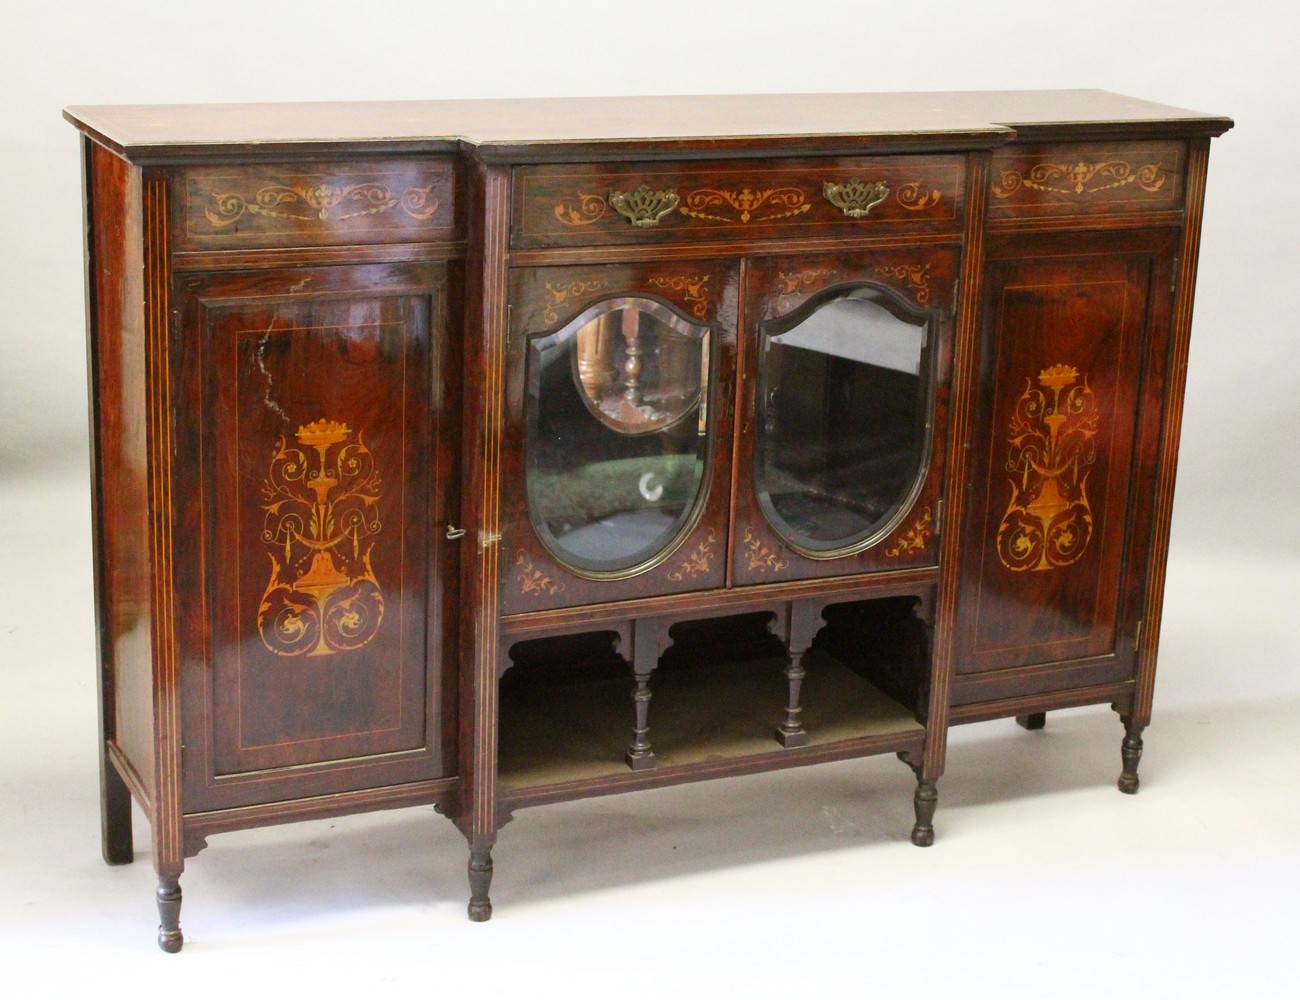 AN EDWARDIAN ROSEWOOD INLAID BREAKFRONT CUPBOARD, the centre with two oval mirrored doors with shelf